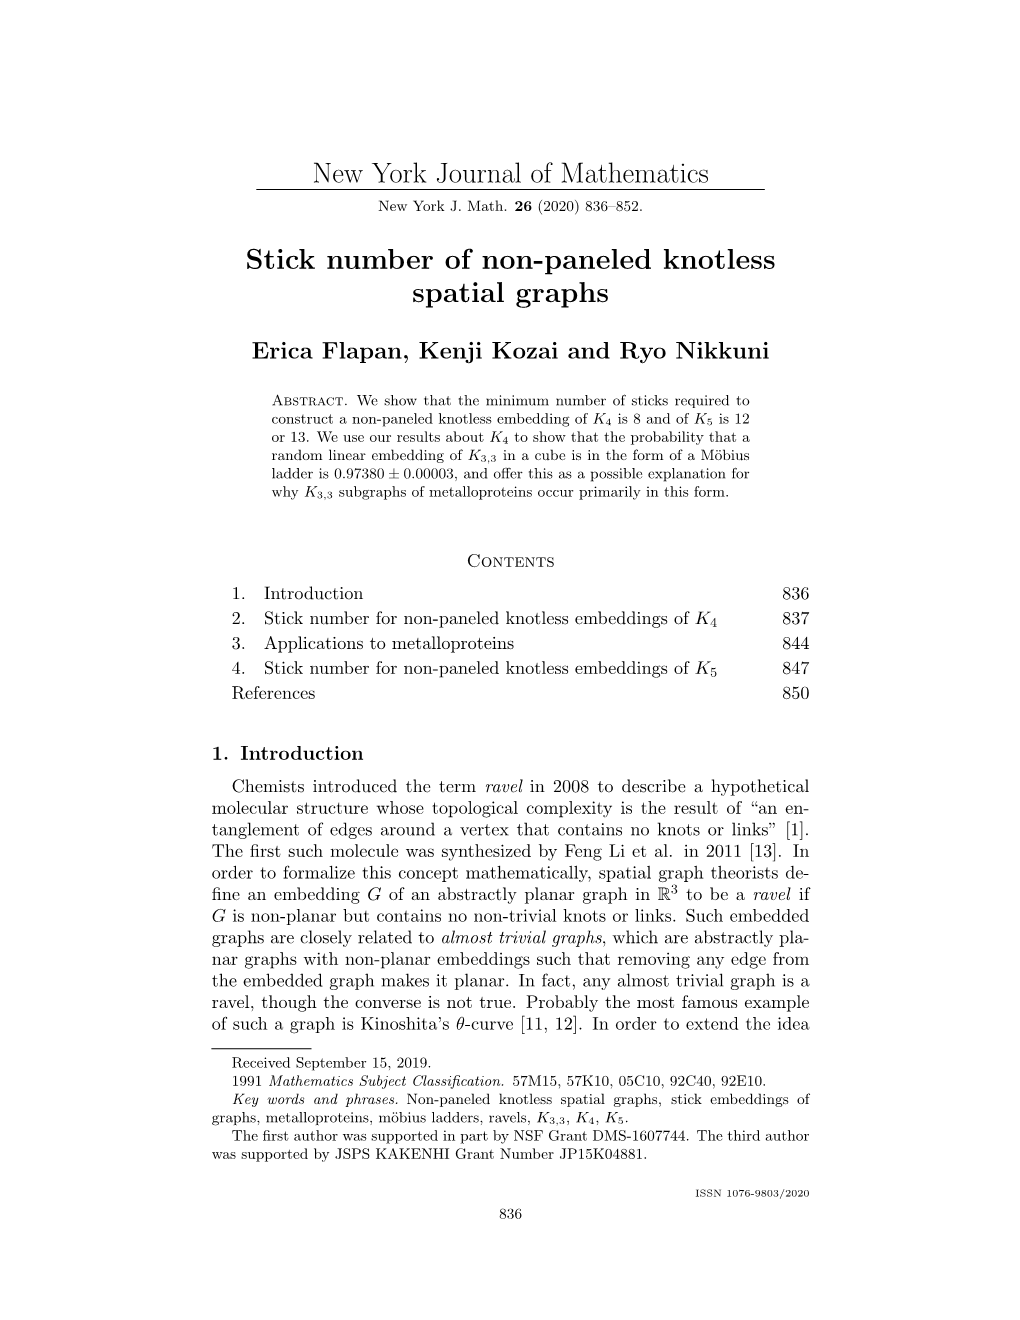 New York Journal of Mathematics Stick Number of Non-Paneled Knotless Spatial Graphs